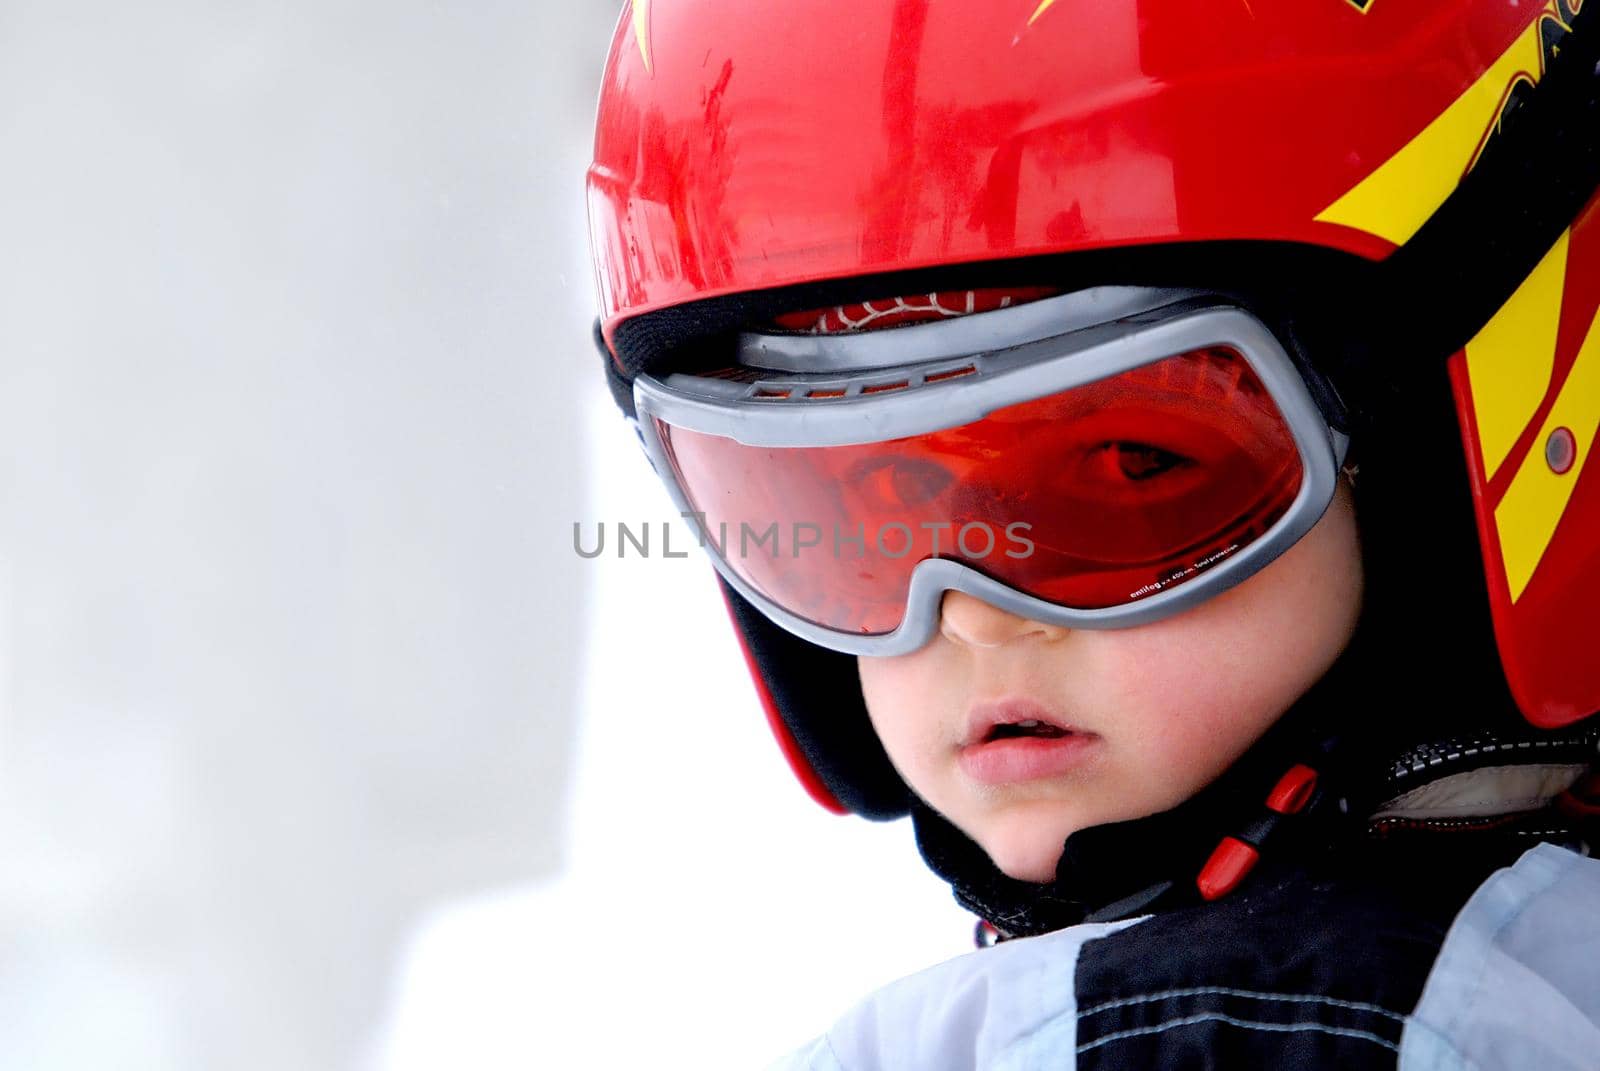 Little skier with helmet and goggles by dotshock